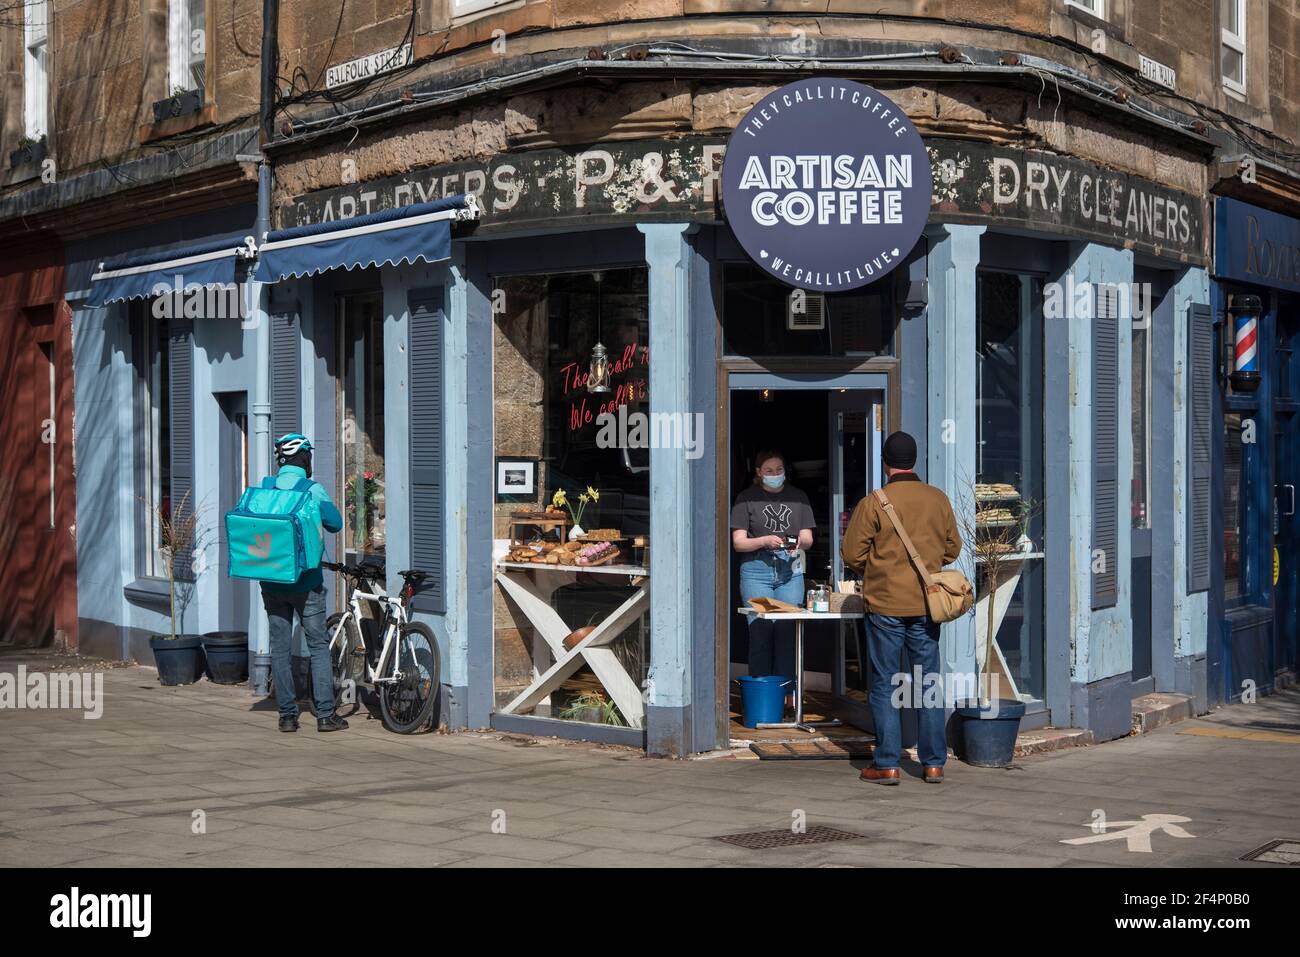 Customer being served at the door of Artisan Coffee on Leith Walk, Edinburgh, Scotland during the covid-19 pandemic. Stock Photo